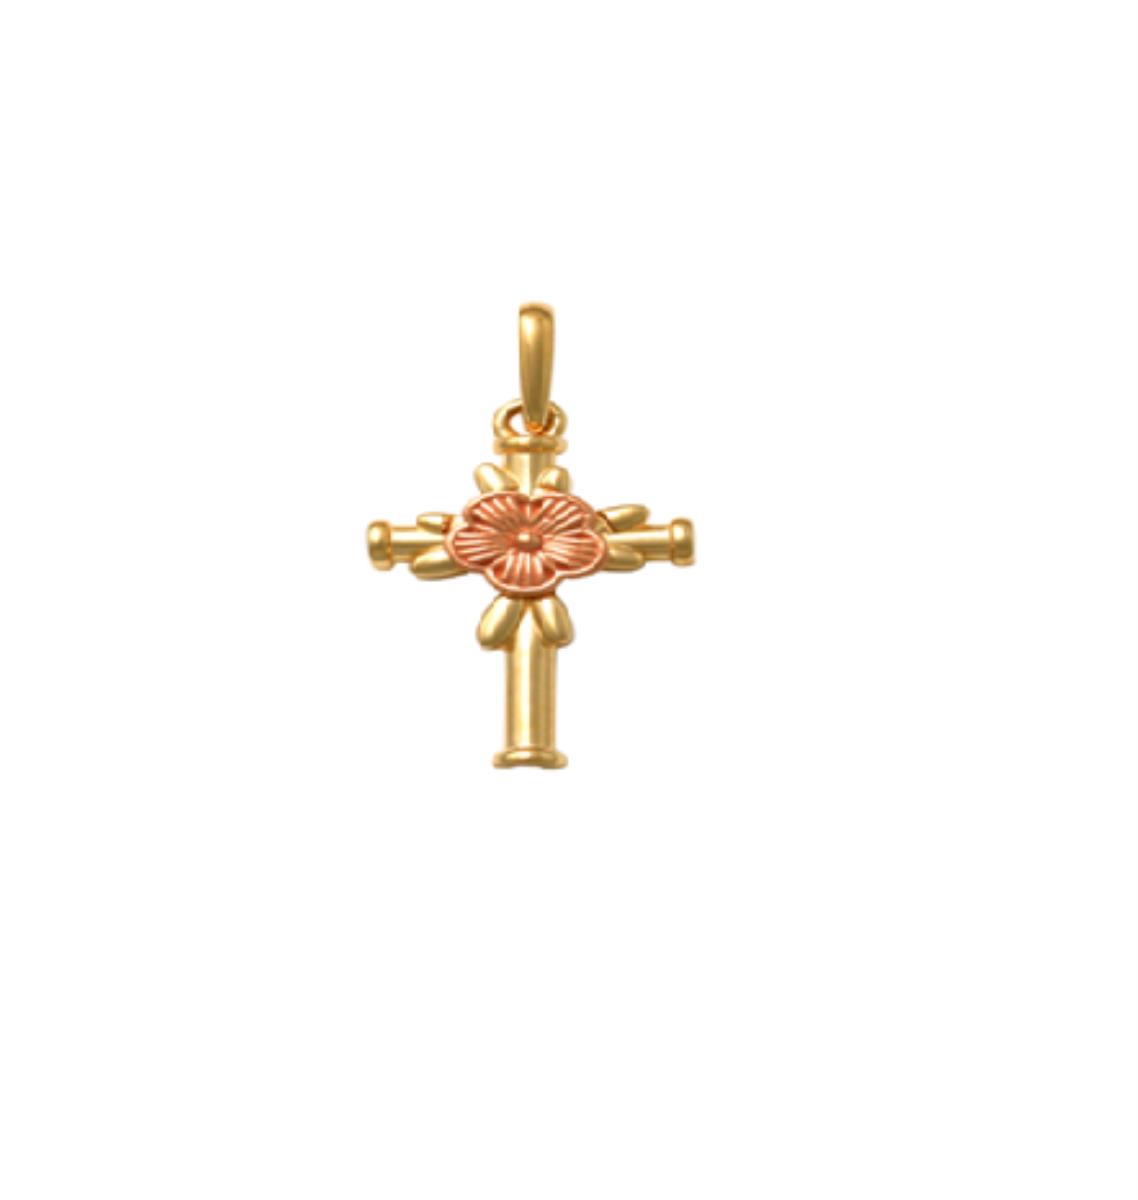 10K Two-Tone Gold Polished Cross with Flower Pendant